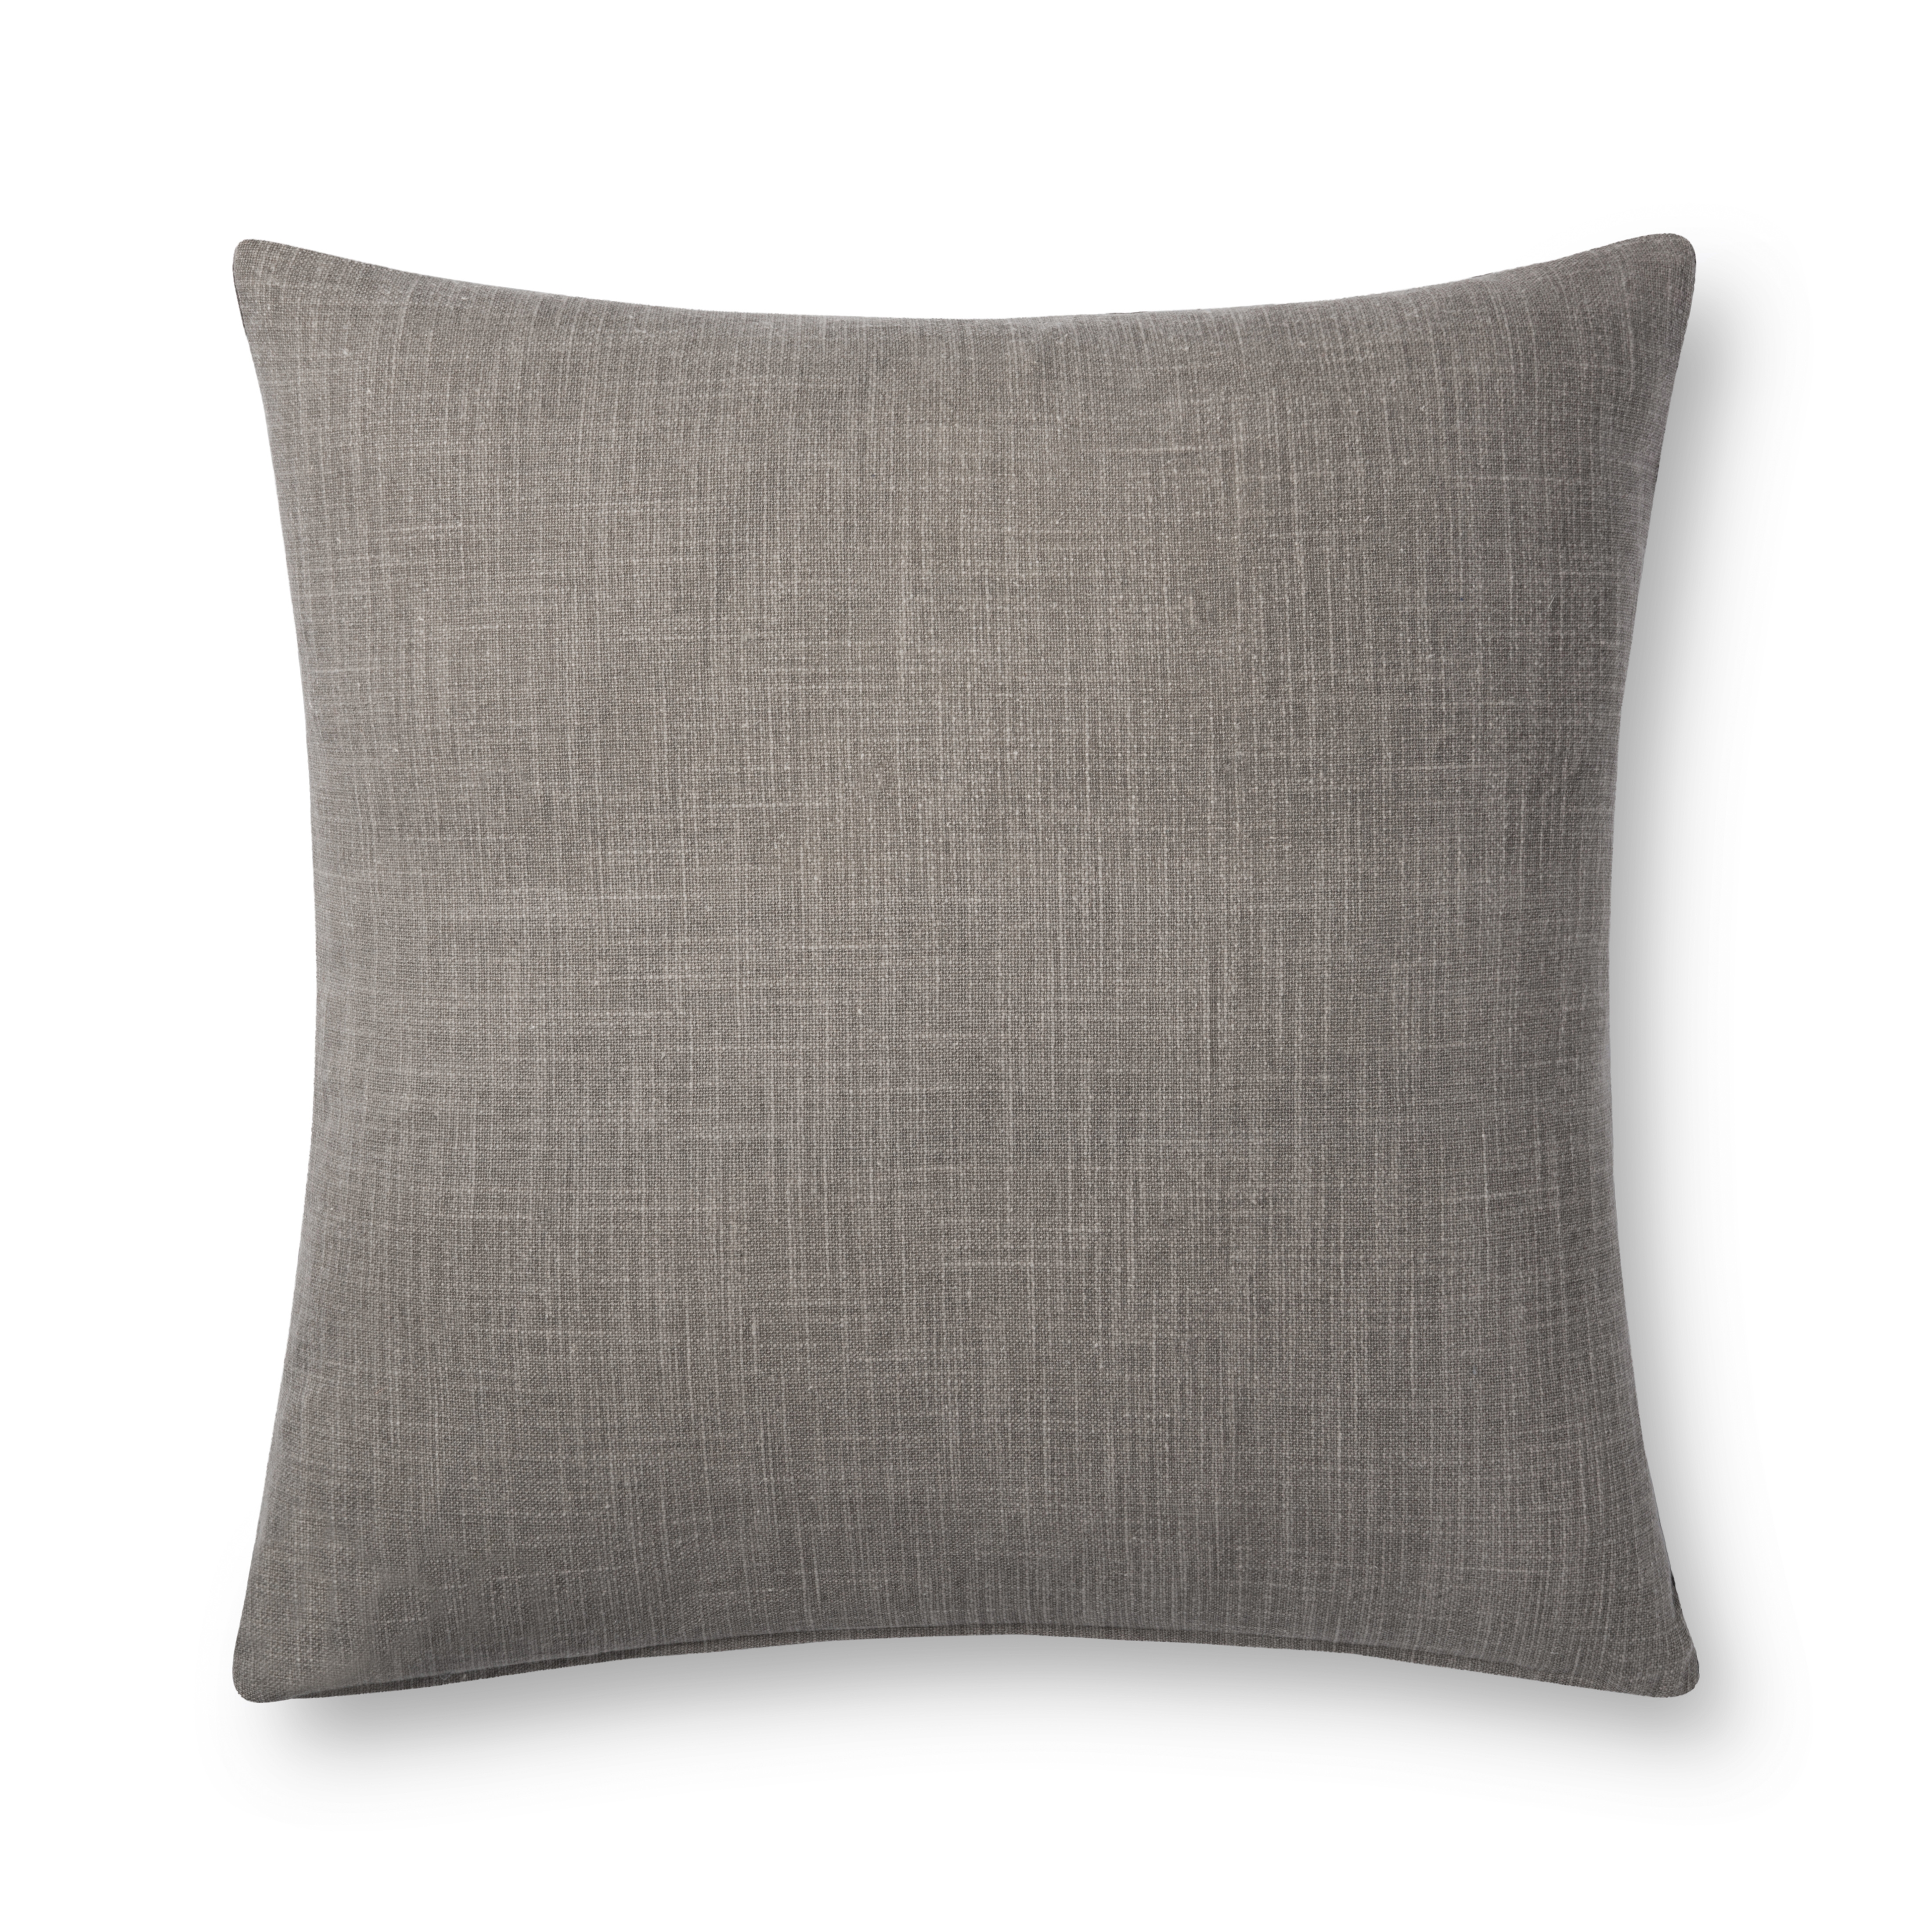 Loloi PILLOWS P0737 Charcoal / Grey 22" x 22" Cover Only - Image 1